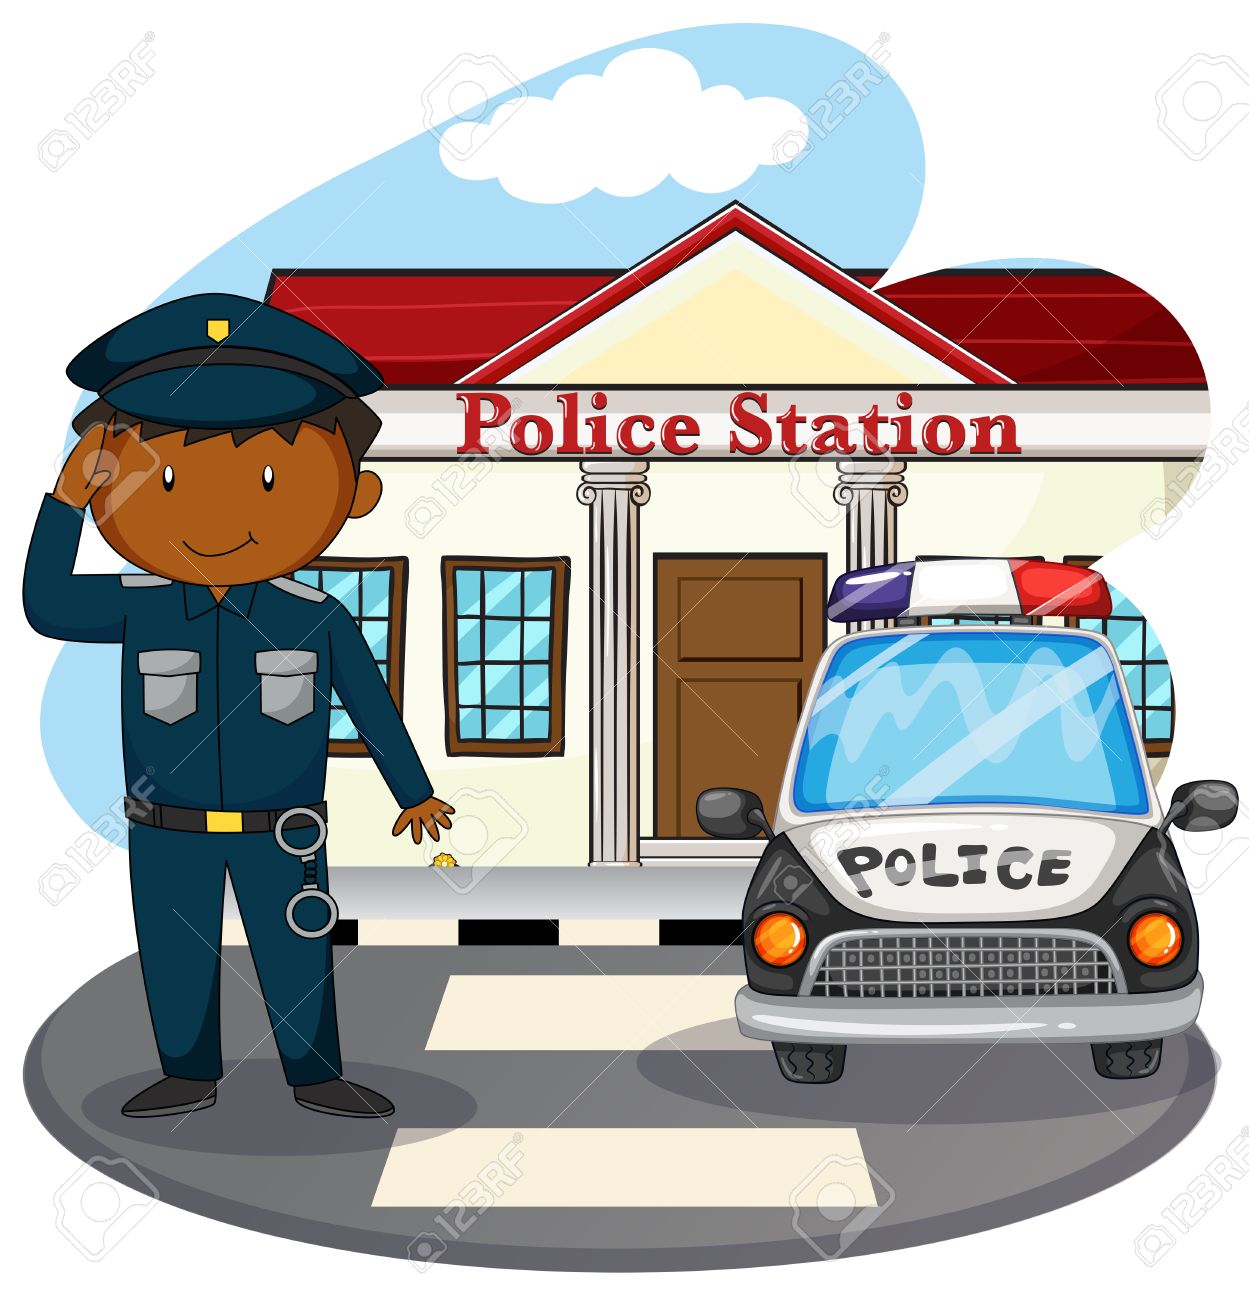 Police Clipart Policia - Police Station Clipart - HD Wallpaper 